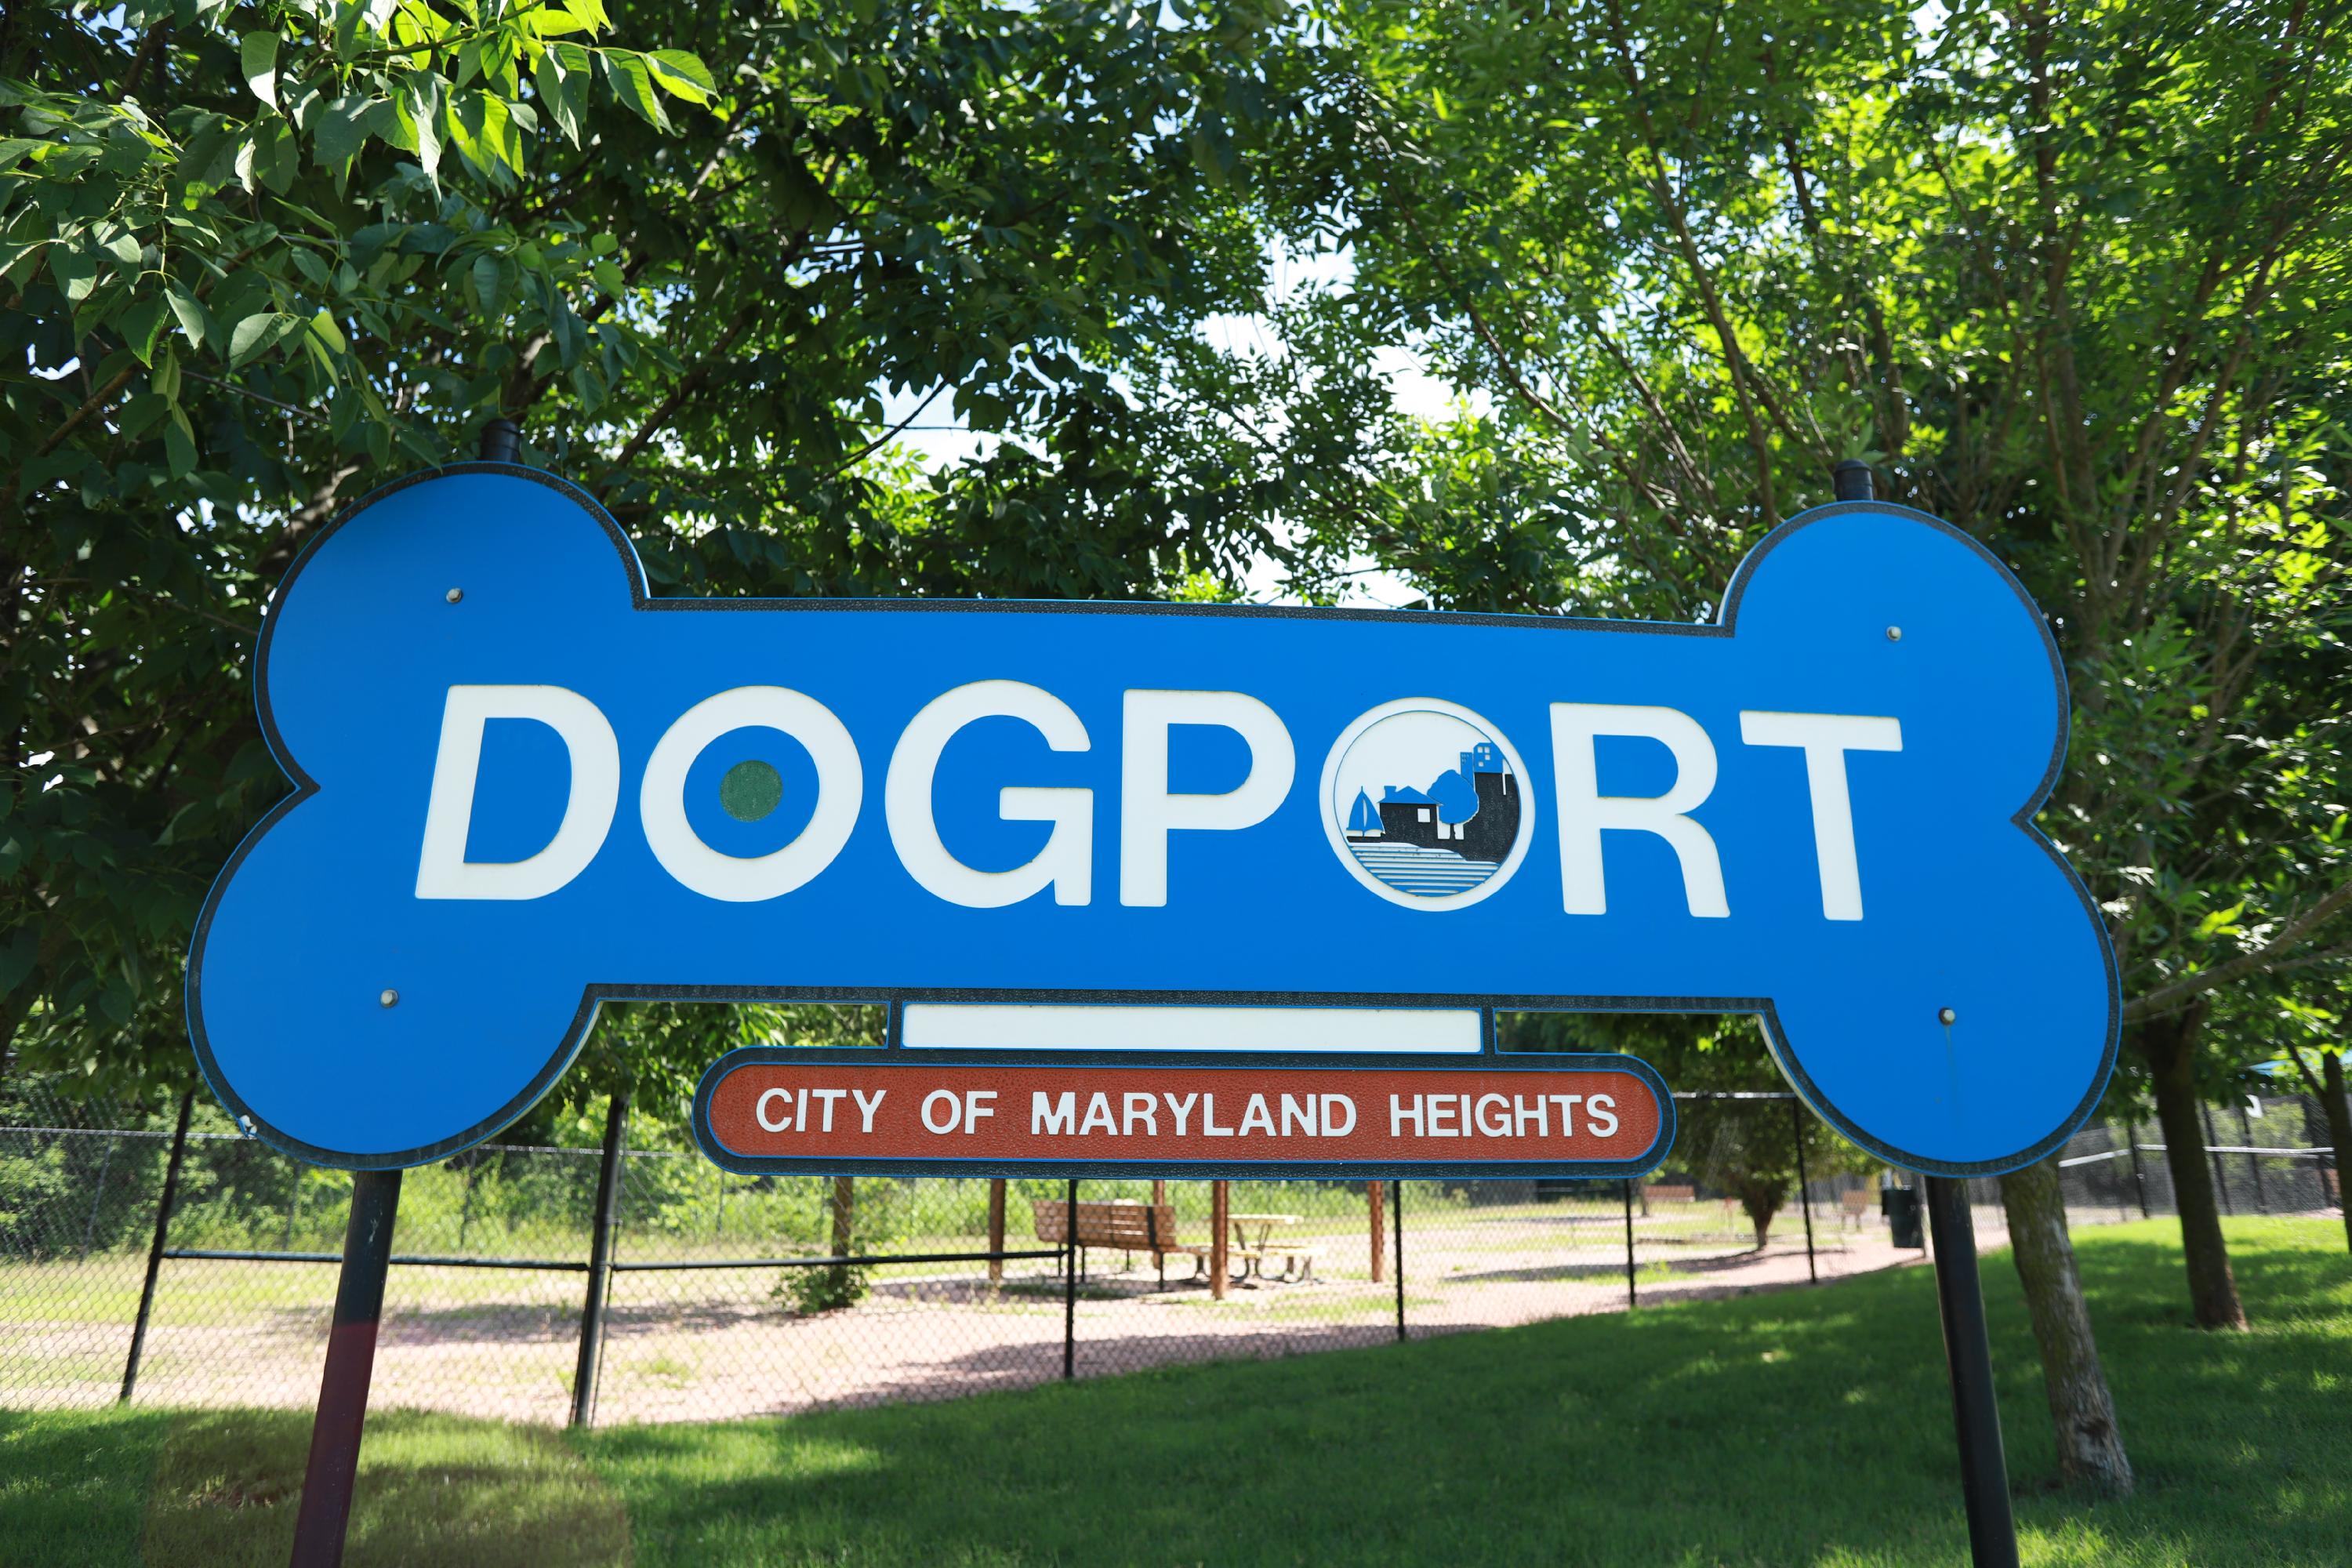 A blue sign in the shape of a dog bone contains the logo for the "Dogport" park, with the City of Maryland Heights logo replacing the second "O" of the park. In the background, green trees are in front of the sandy play area on a sunny summer day.